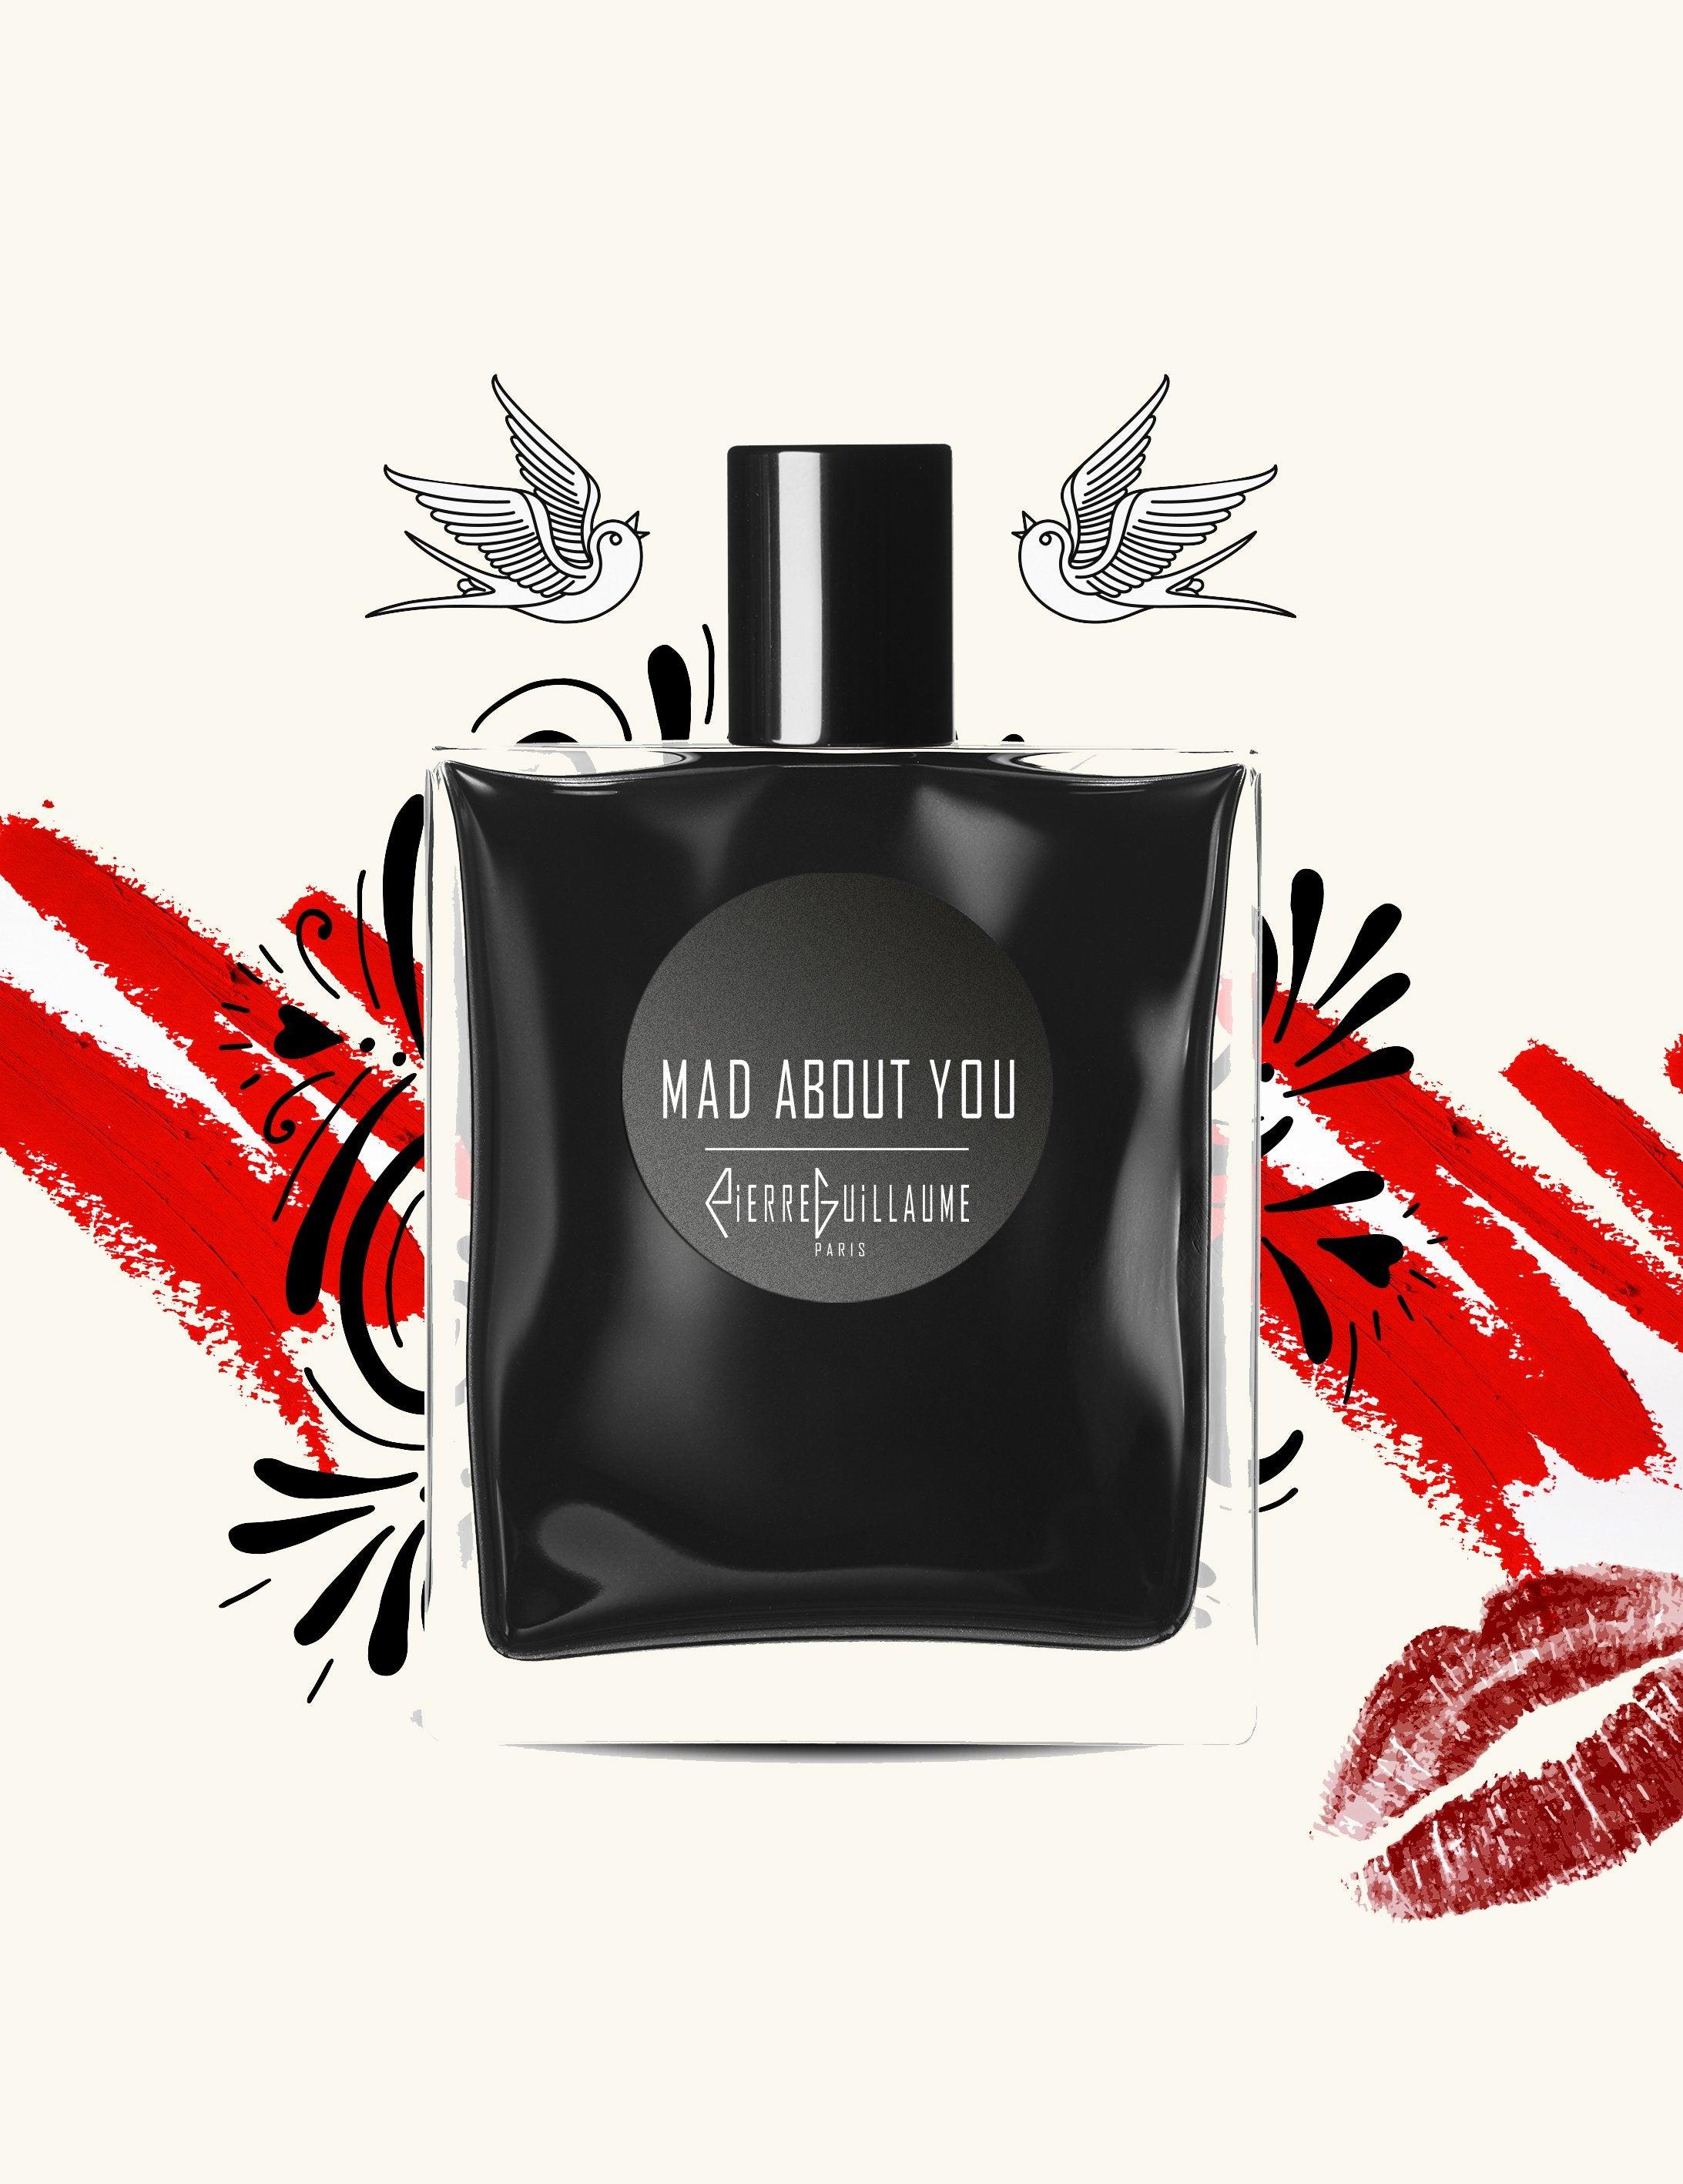 Piere Guillaume Paris - Mad About You | Perfume Lounge